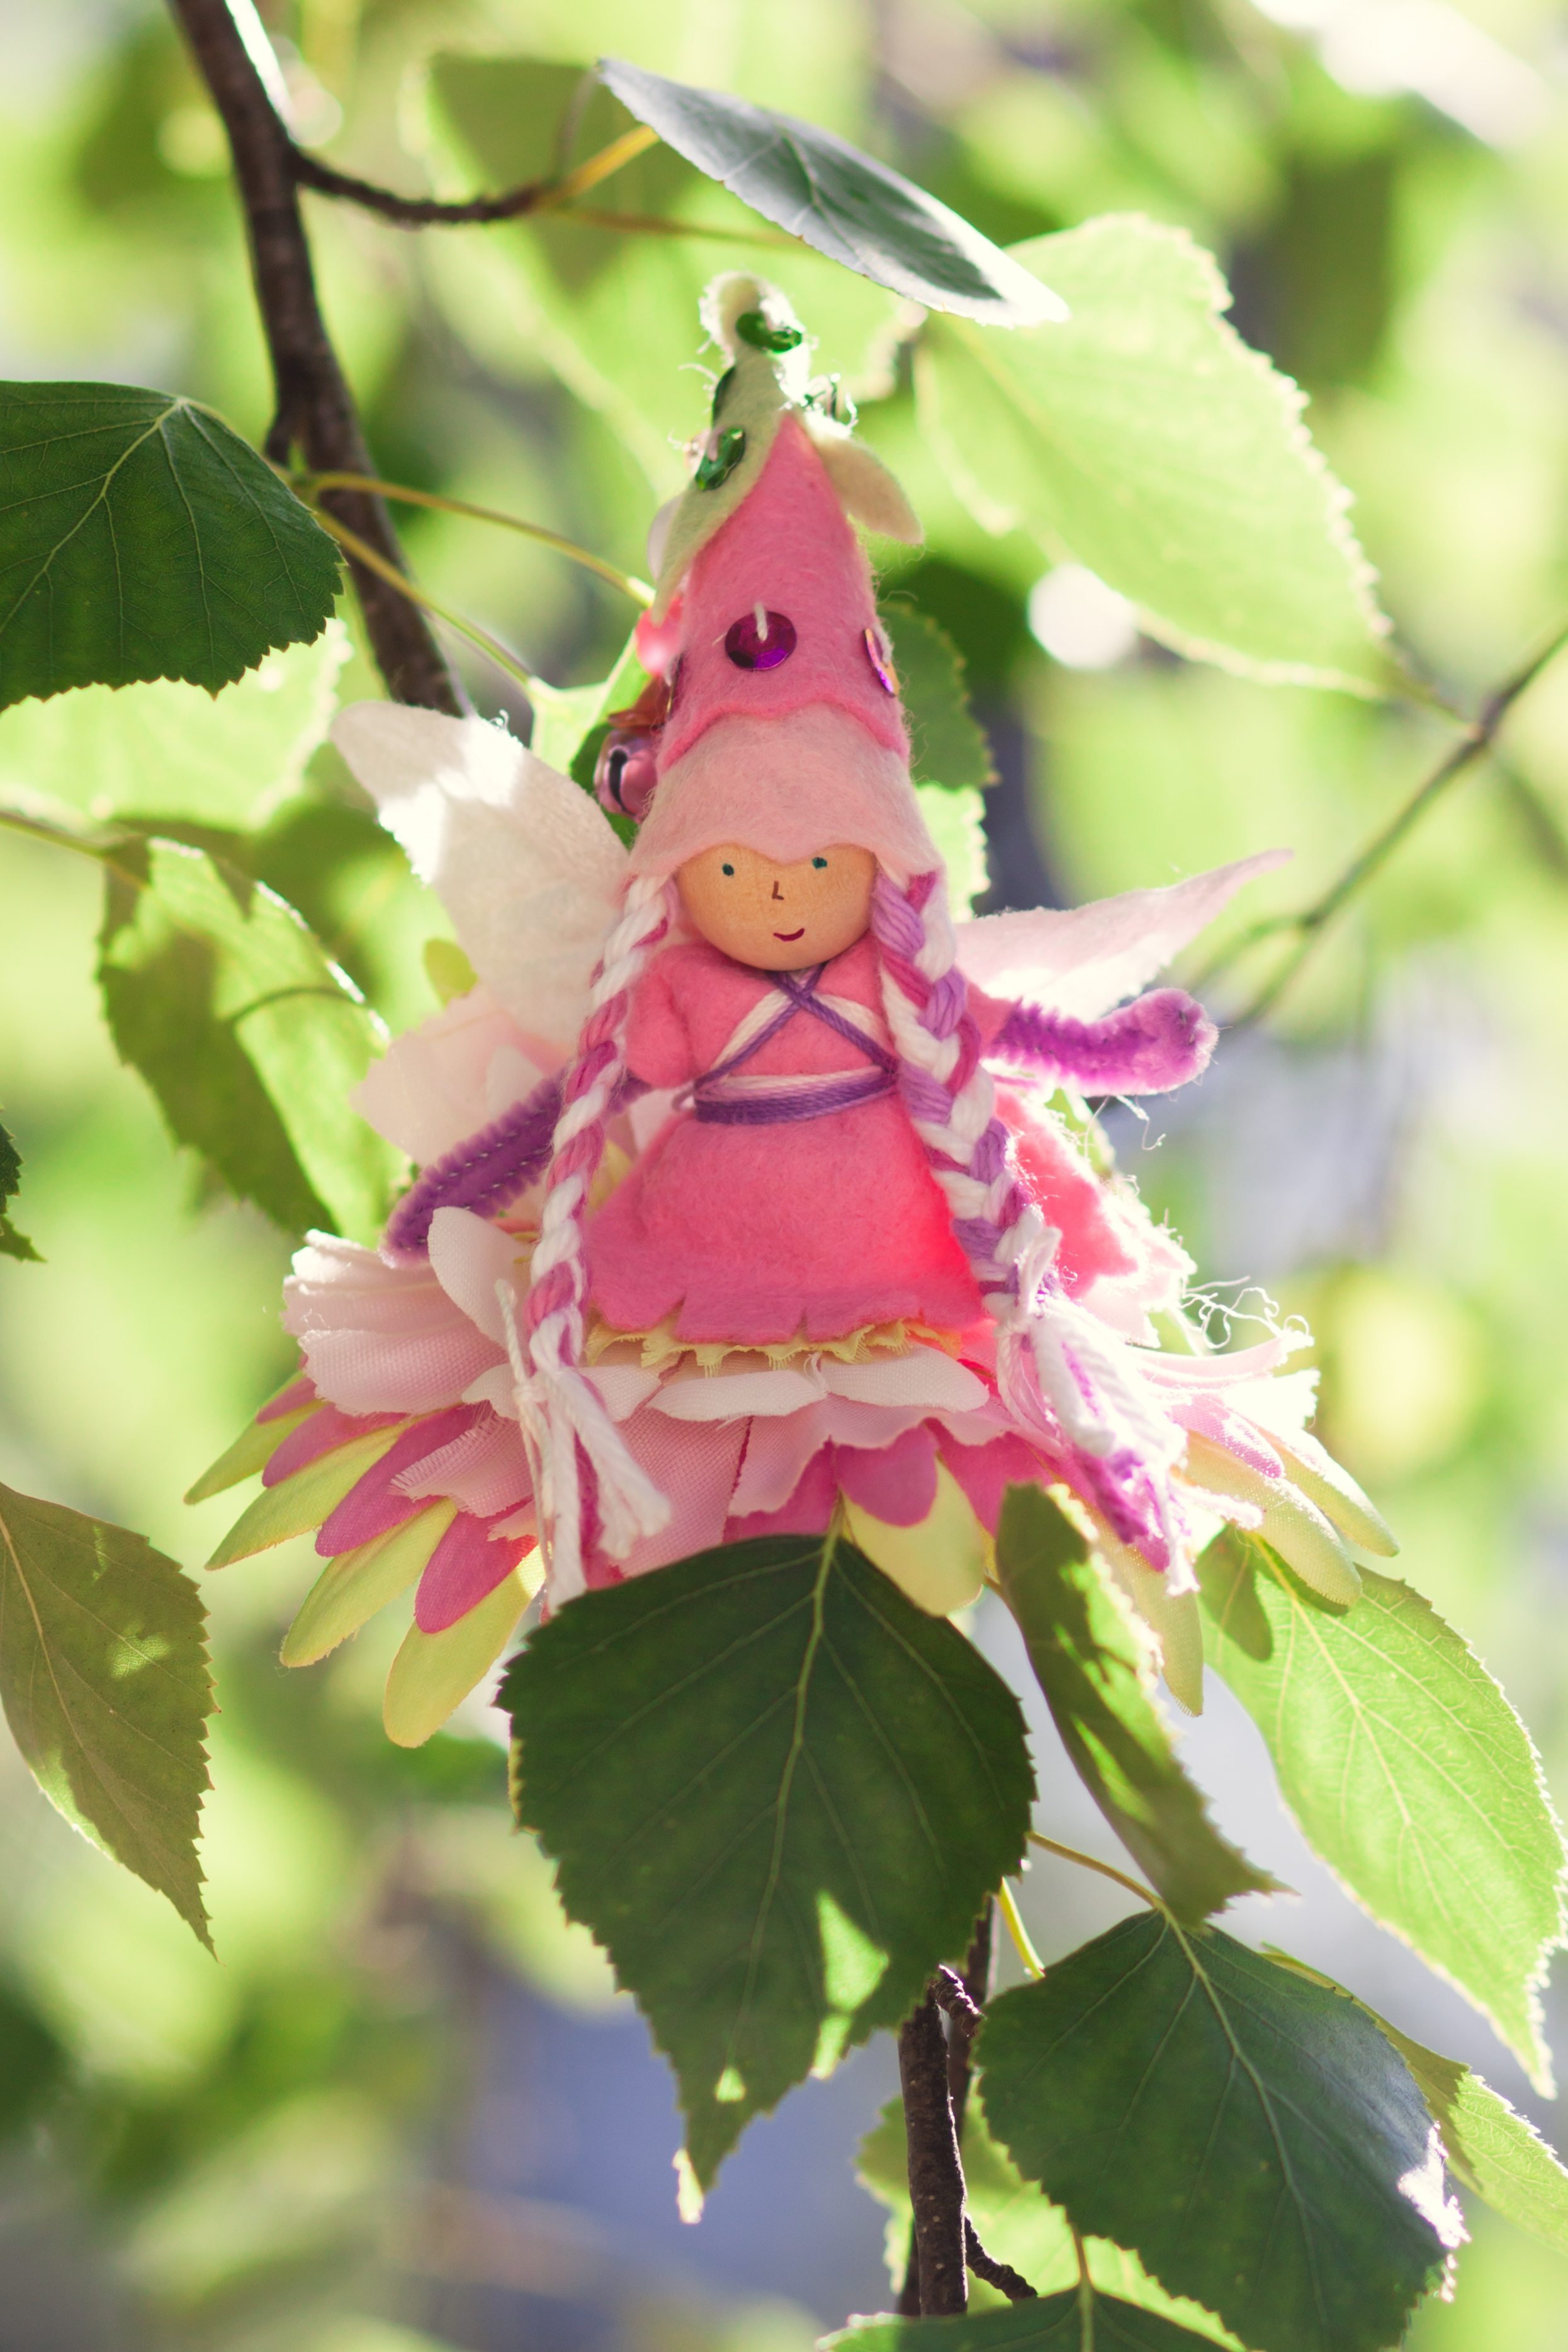 Fairy Bendy Doll for Spring | Learn to make your own enchanted crafts with simple supplies with the Forest Fairy Craft Books by Lenka Vodicka-Paredes and Asia Currie